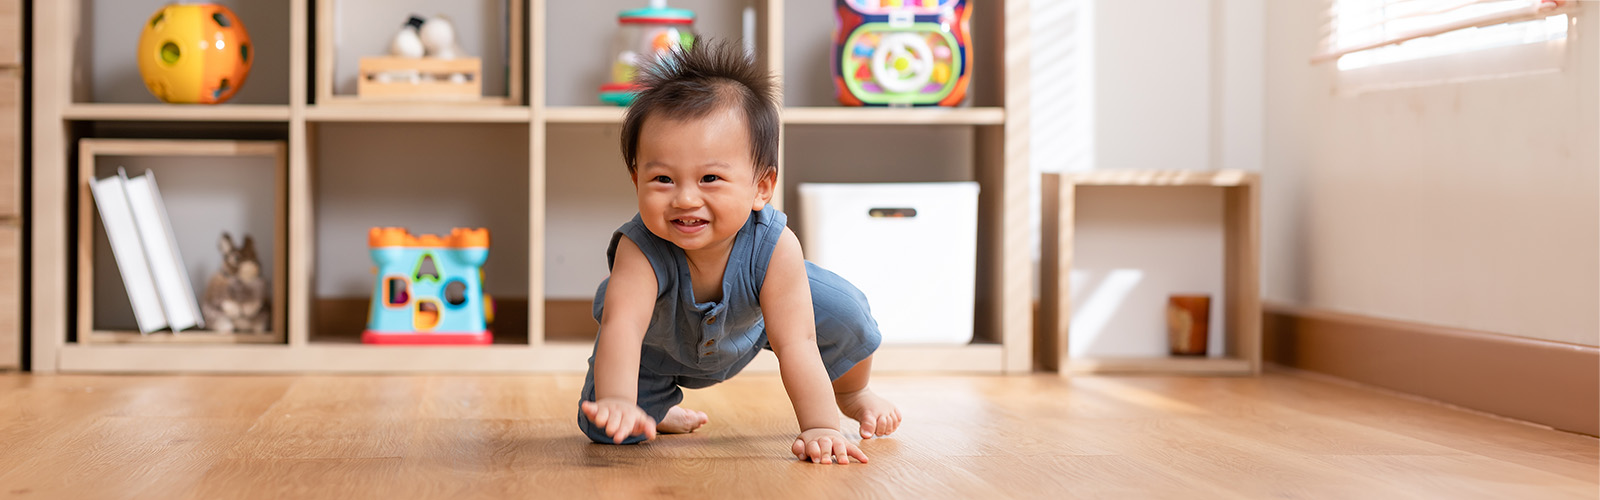 toddler crawling across a wooden floor in a play room